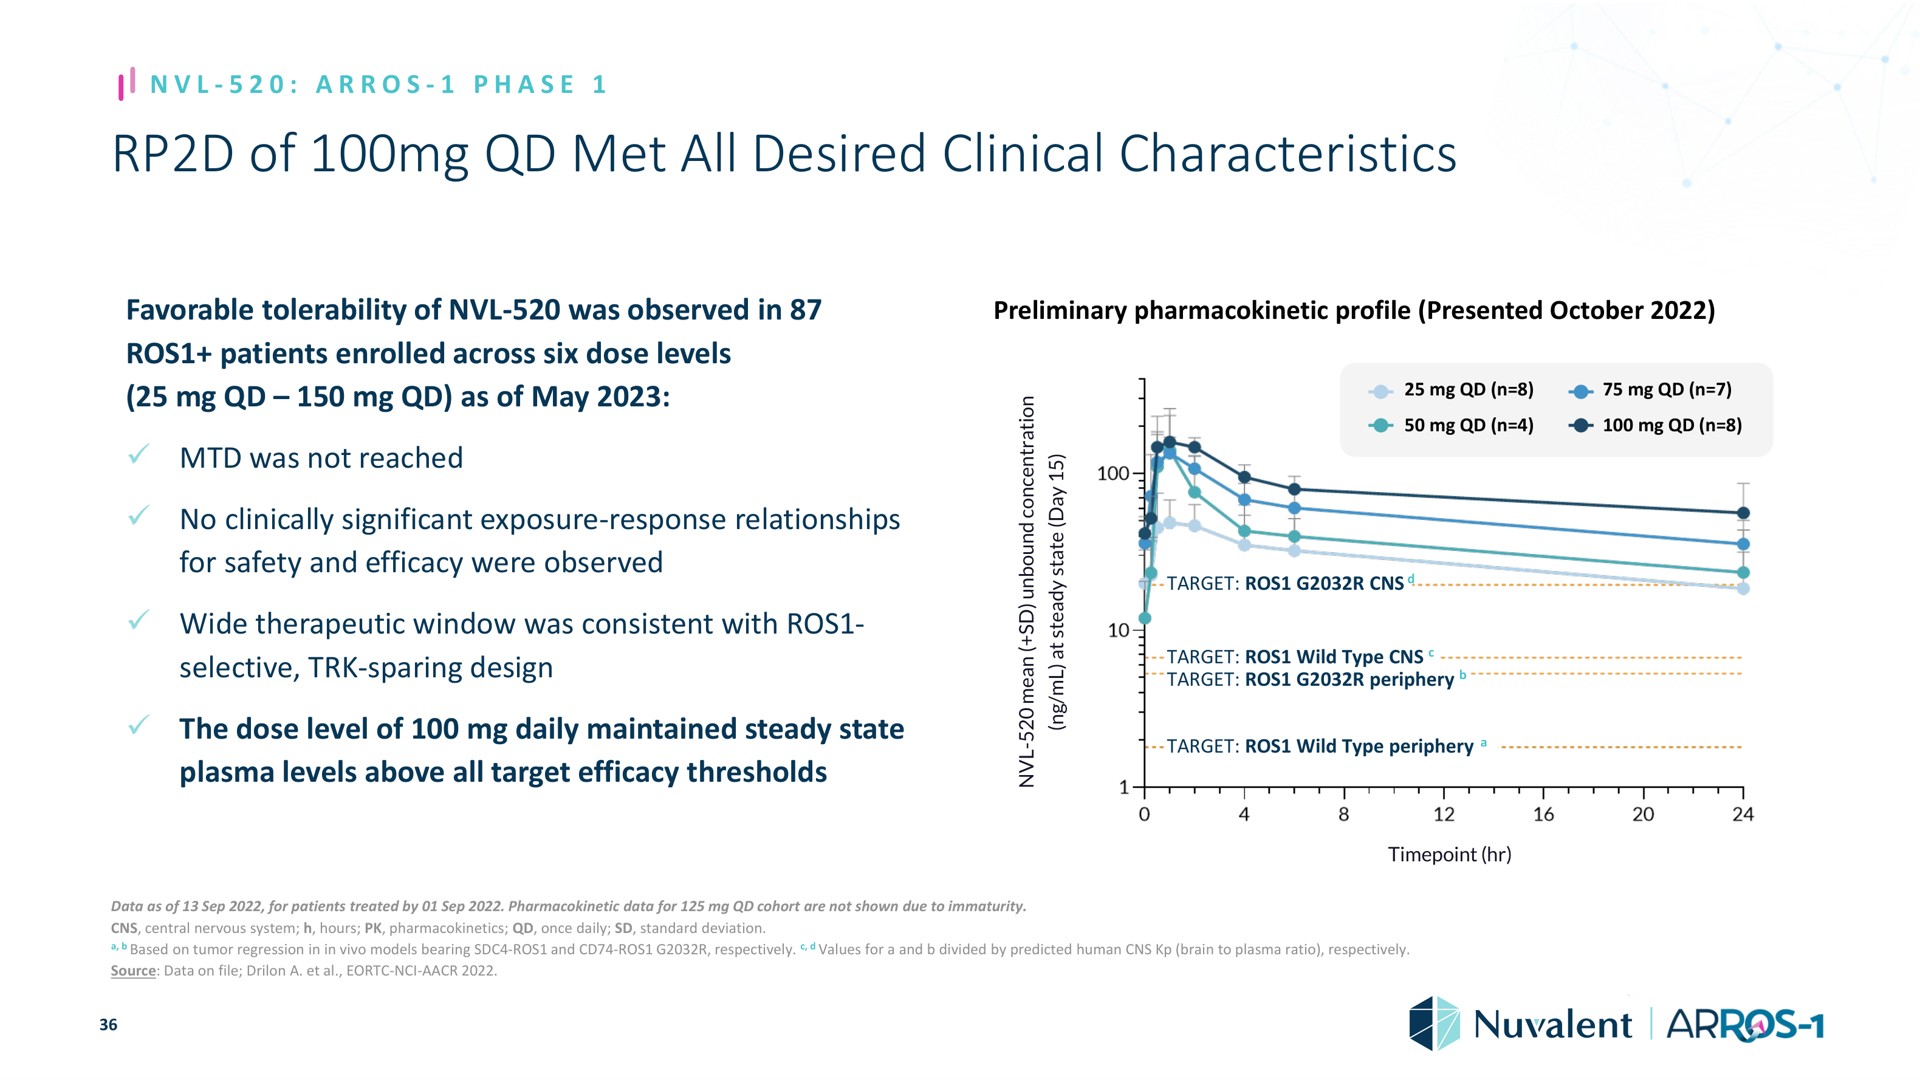 of met all desired clinical characteristics phase favorable tolerability was observed in preliminary profile presented patients enrolled across six dose levels as may was not reached no clinically significant exposure response relationships for safety and efficacy were observed wide therapeutic window was consistent with selective sparing design the dose level daily maintained steady state plasma levels above target efficacy thresholds i a a a a a a target target wild type target periphery target wild type periphery data as for patients treated by data for cohort are not shown due to immaturity central nervous system hours once daily standard deviation based on tumor regression in in models bearing and respectively values for a and divided by predicted human brain to plasma ratio respectively source data on file a i | Nuvalent